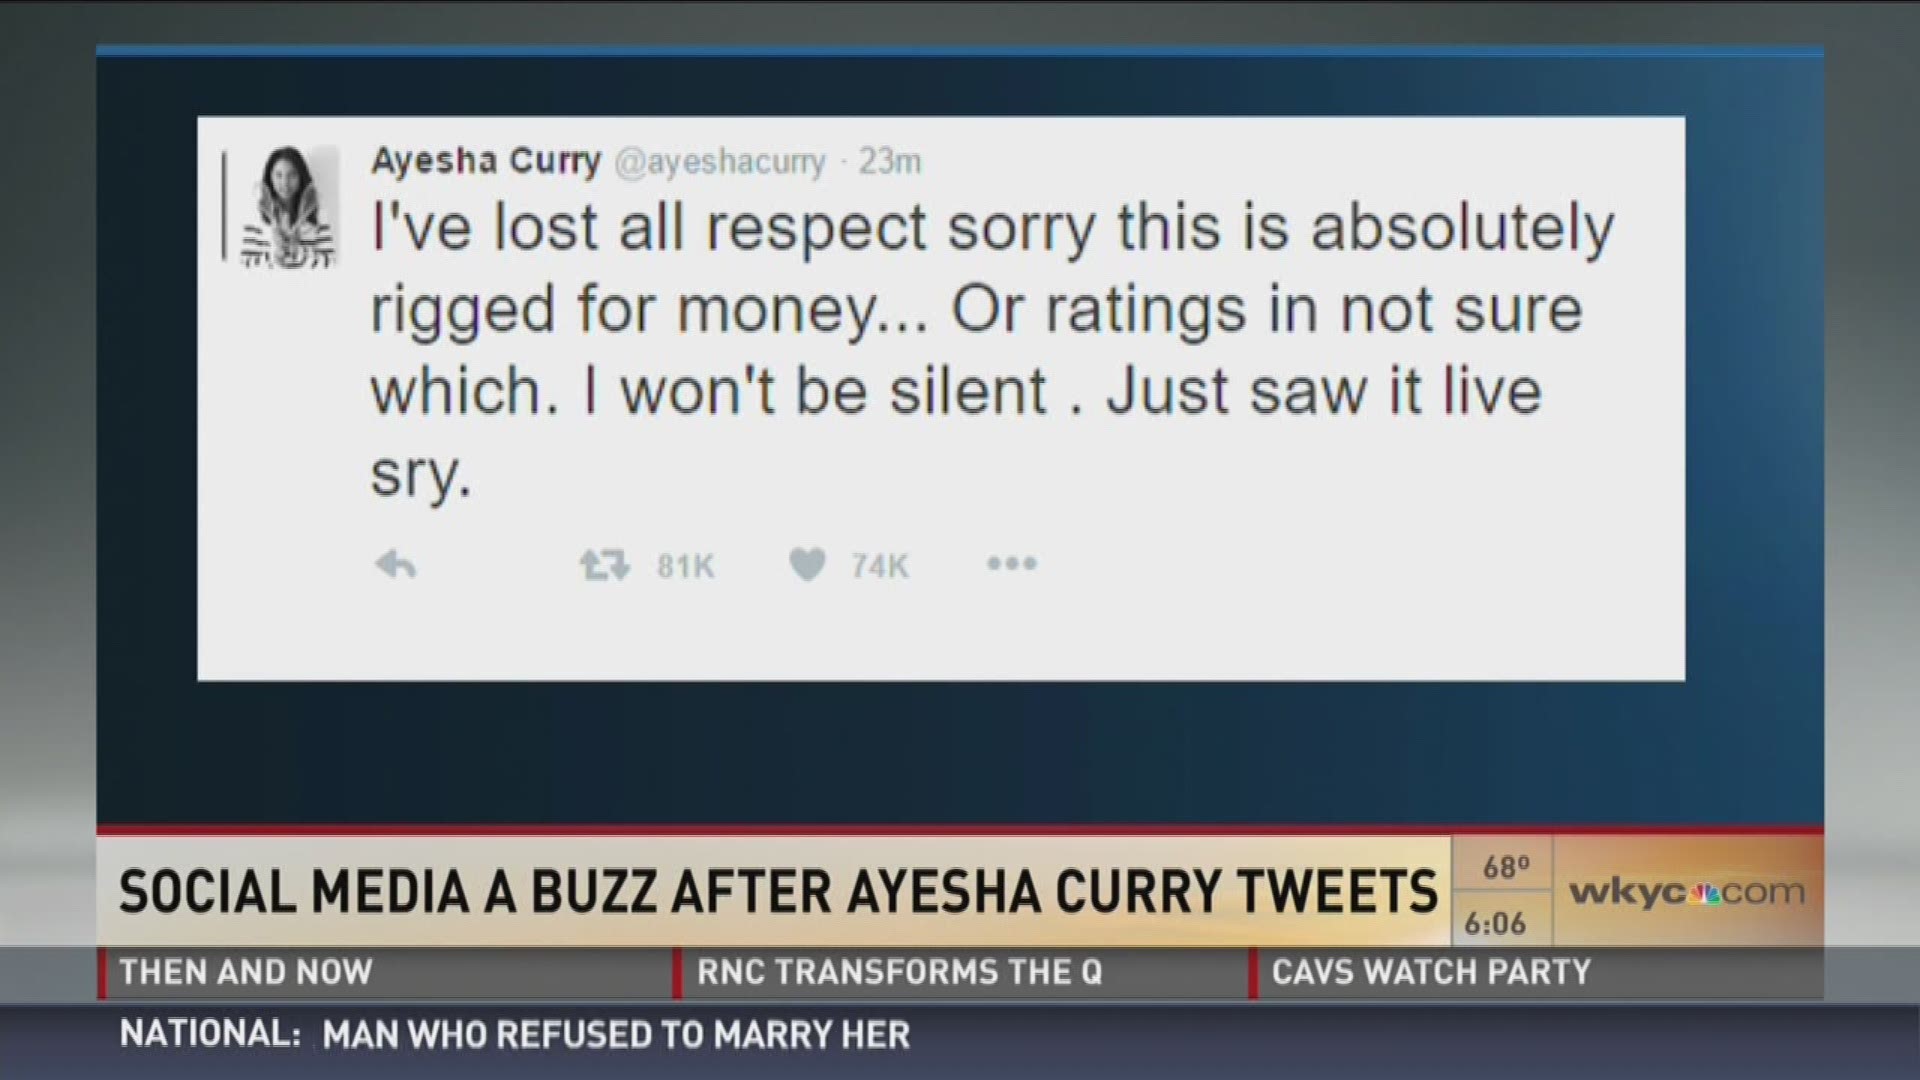 June 17, 2016: Stephen Curry's wife set social media on fire after accusing the NBA Finals of being rigged. WKYC's Tiffany Tarpley has the story. Follow @TiffanyTarpley on Twitter for more.